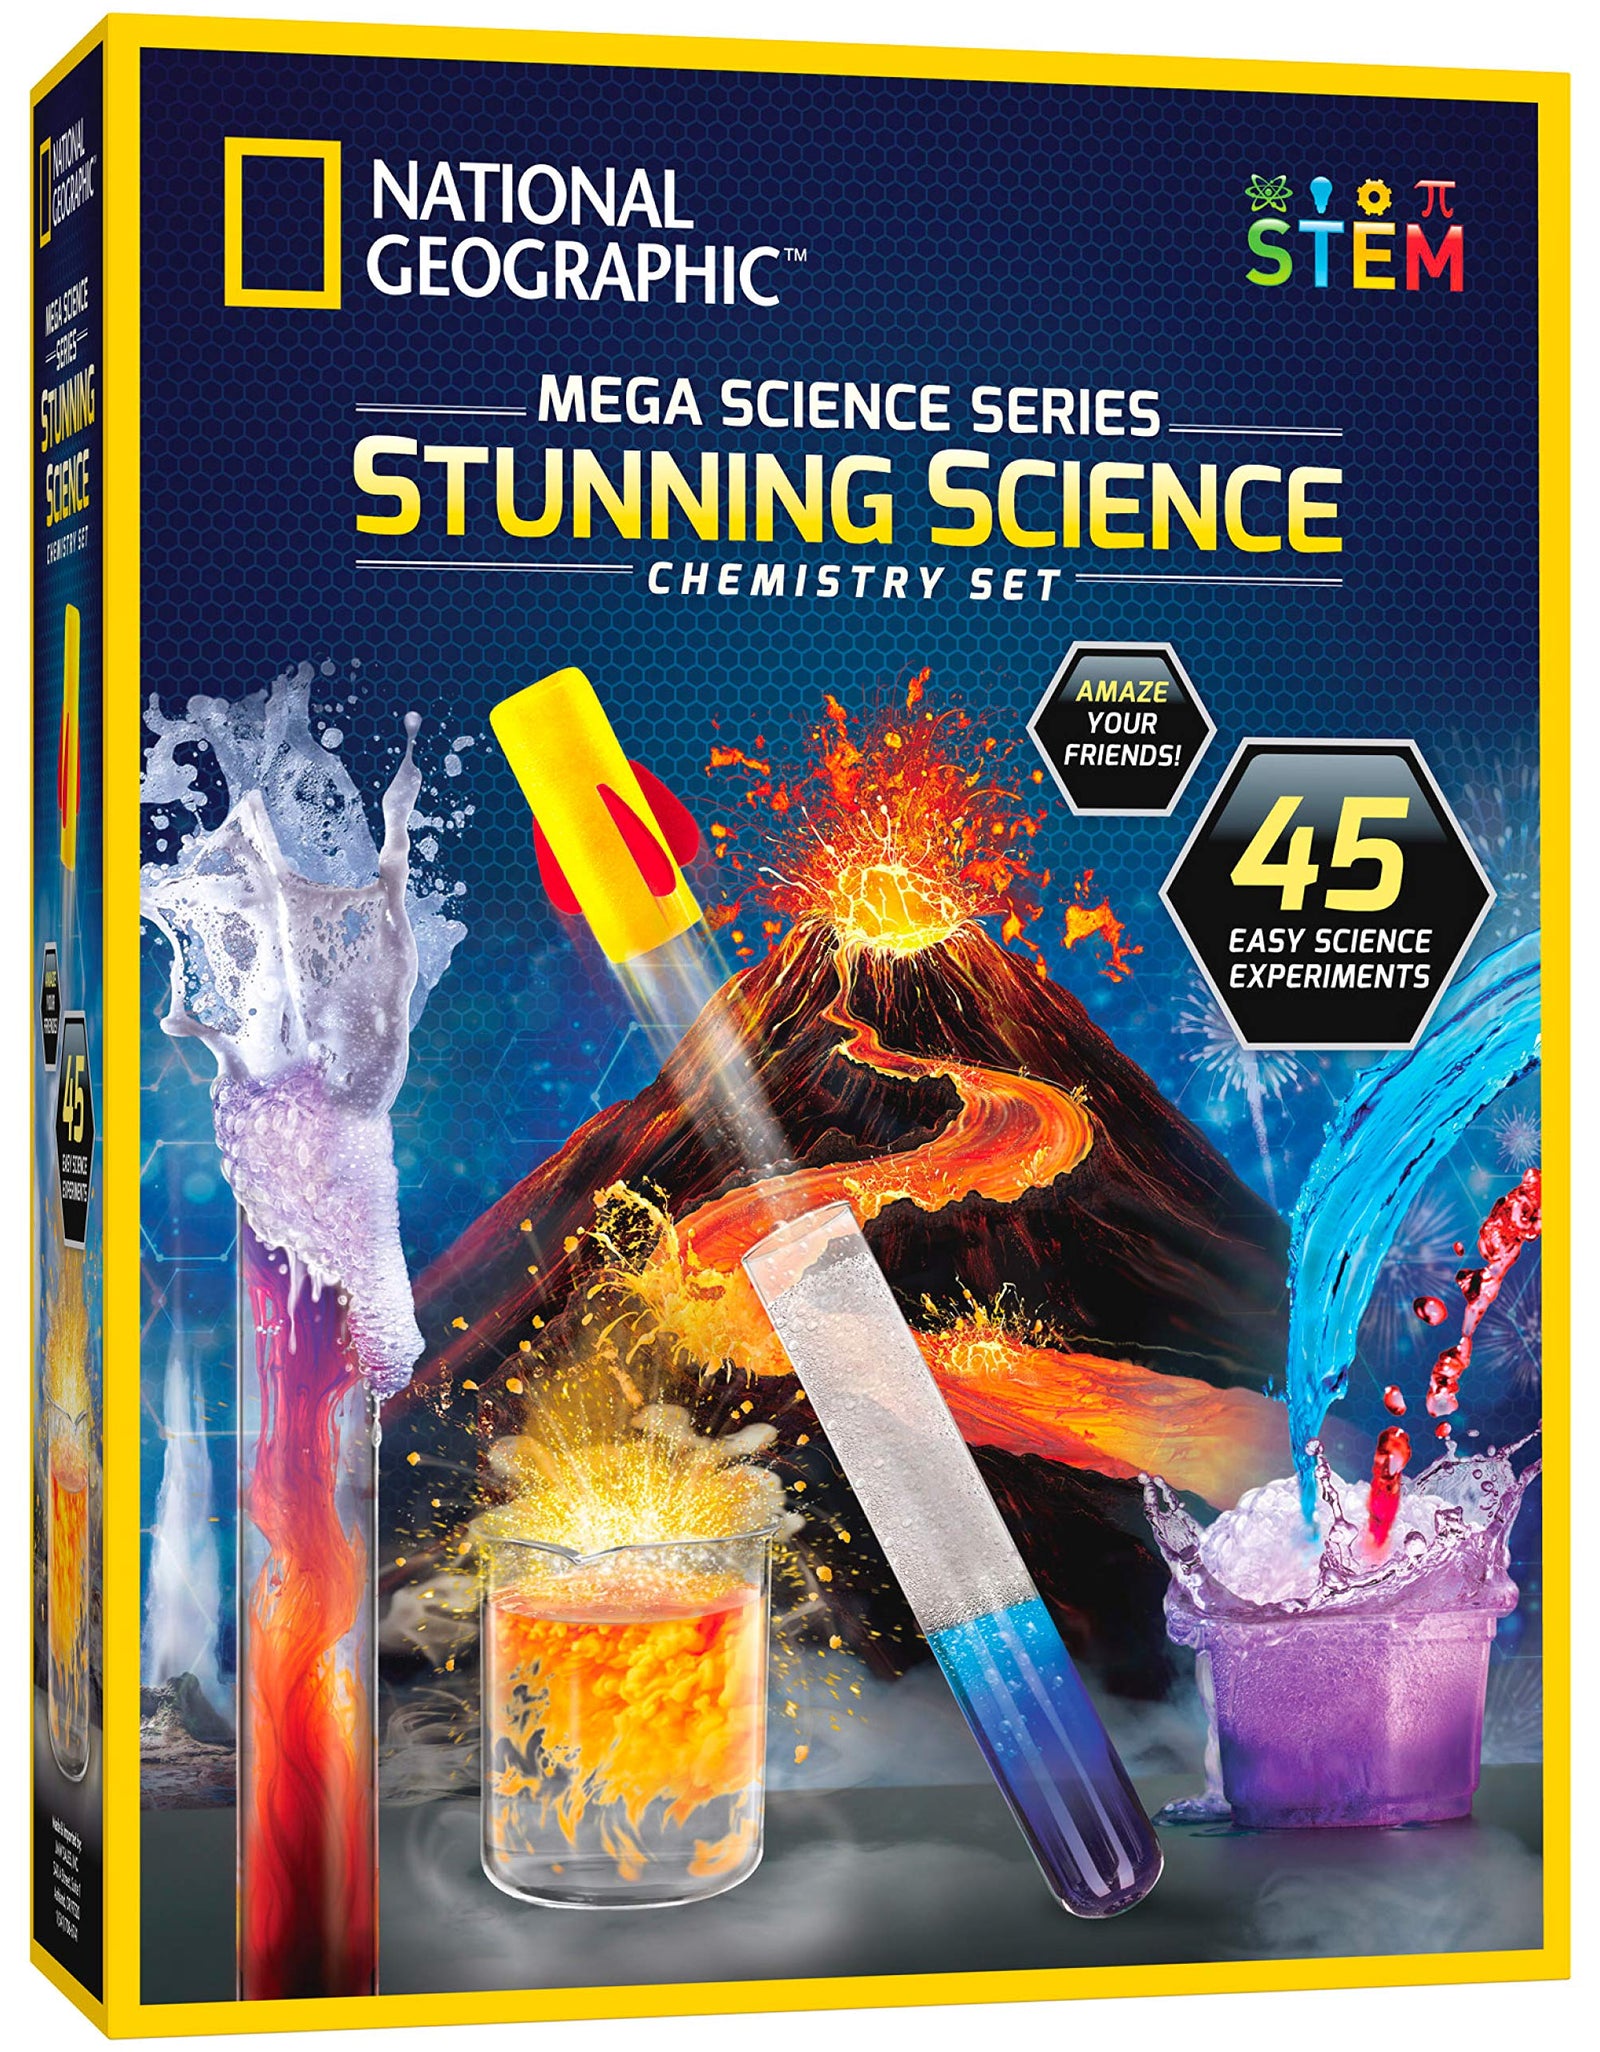 NATIONAL GEOGRAPHIC Stunning Chemistry Set - Mega Science Kit with Over 15 Easy Experiments, Make a Volcano, Launch a Rocket, Create Fizzy Reactions, & More, STEM Toy, an Amazon Exclusive Science Kit